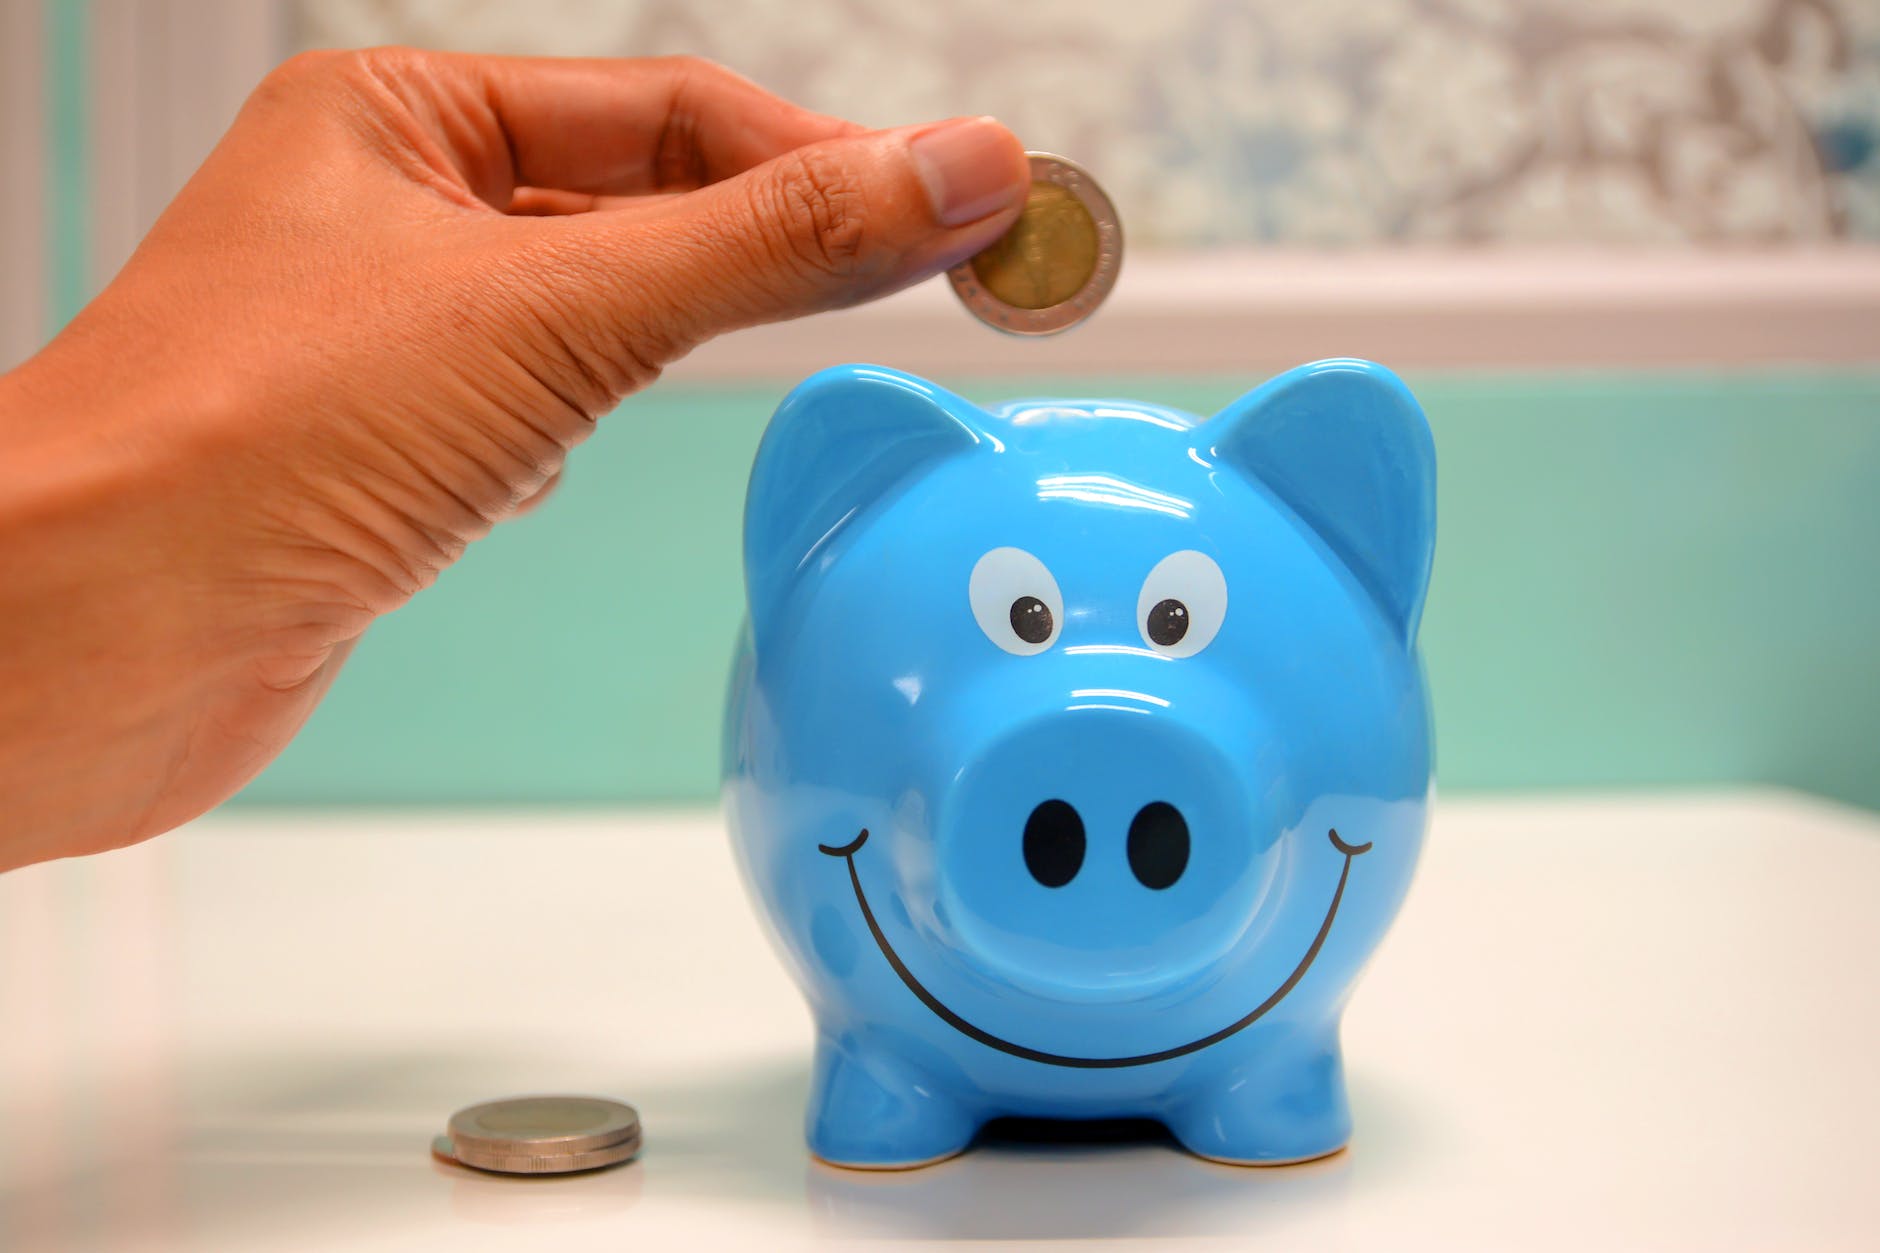 Learn to save and make money with Bravely Go (image of person putting coin in a piggy bank)